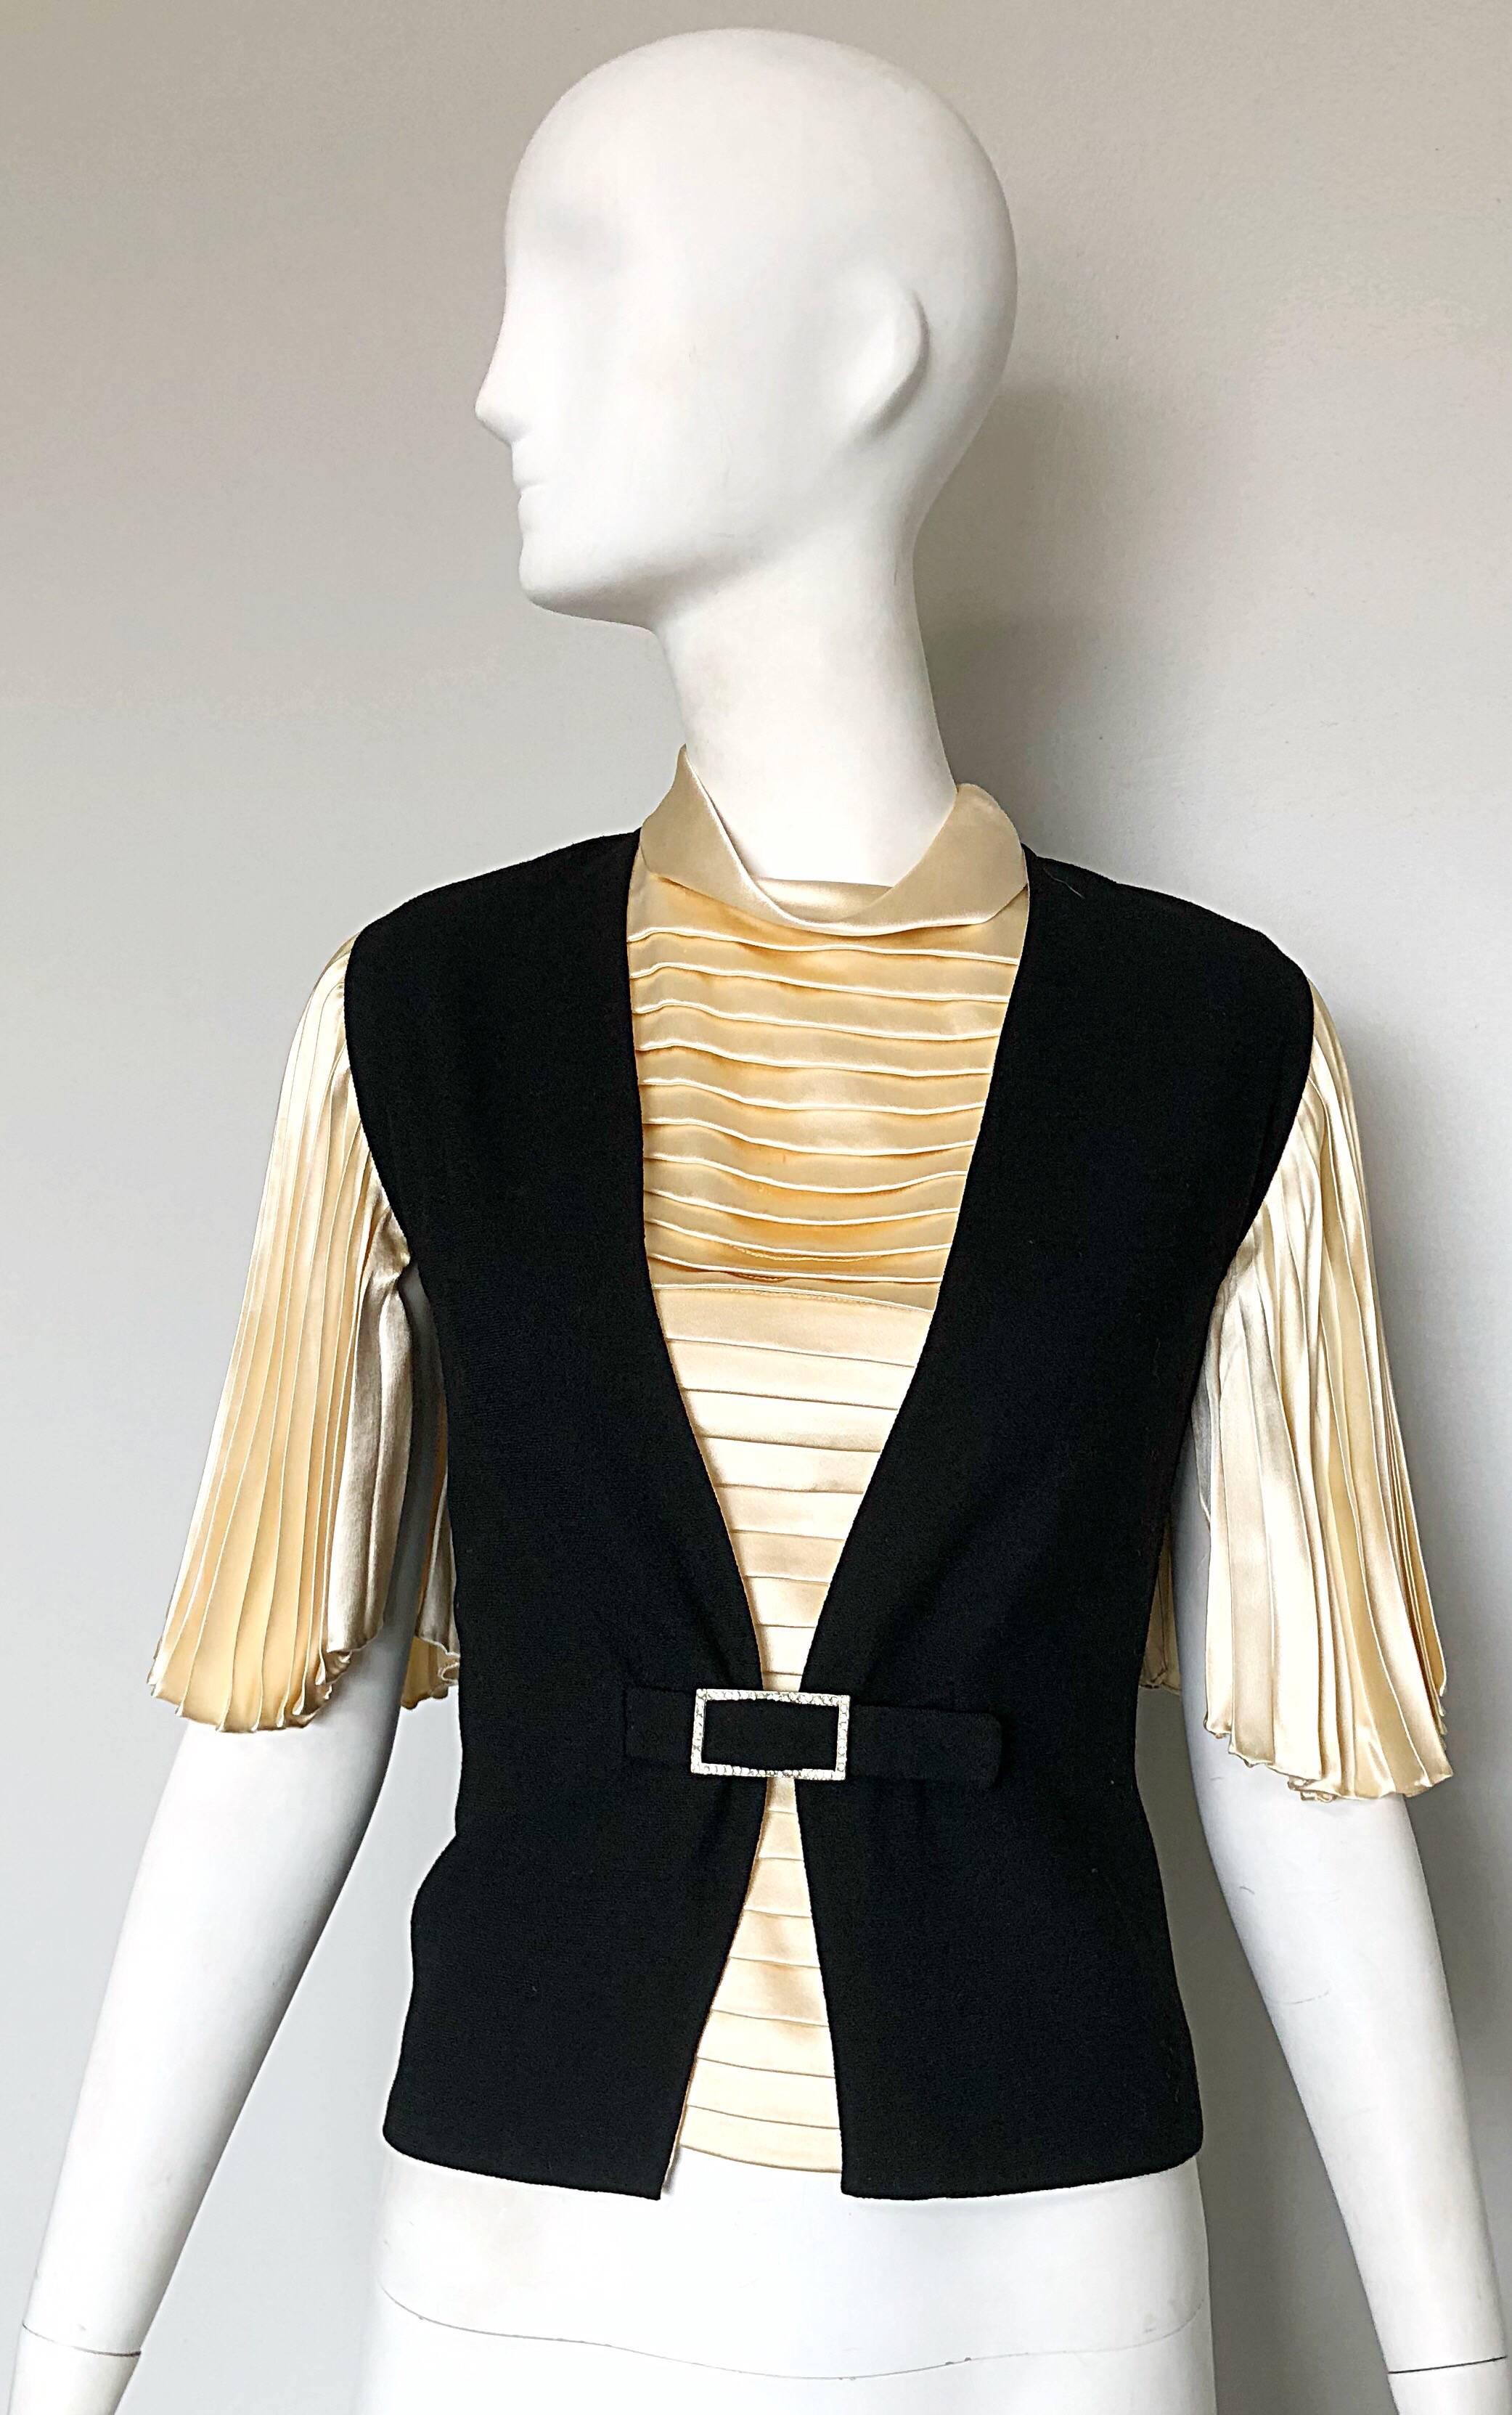 Chic 60s vintage CARDINALI original sample ivory off-white silk top and sleeveless black vest! This ensemble comes directly from the late designer's (Marilyn Lewis) estate. Ivory silk pleated blouse with amazing accordian flutter sleeves. Full metal